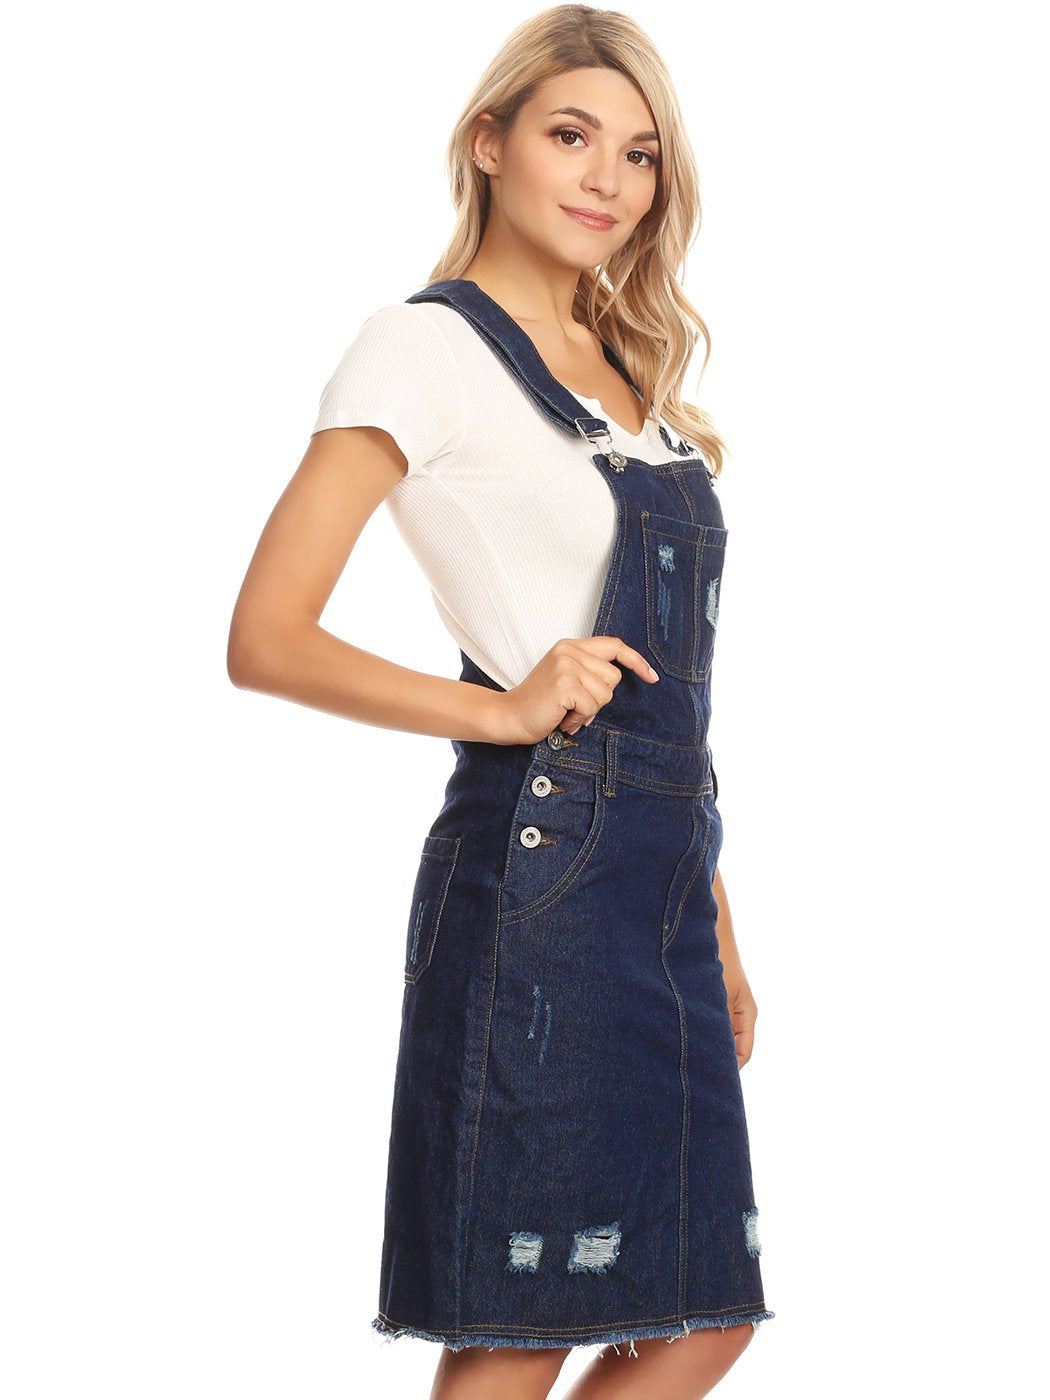 Buy LINGMIN Women's Casual Denim Overalls Dress Ripped Adjustable Strap  Skirt Plus Size at Amazon.in